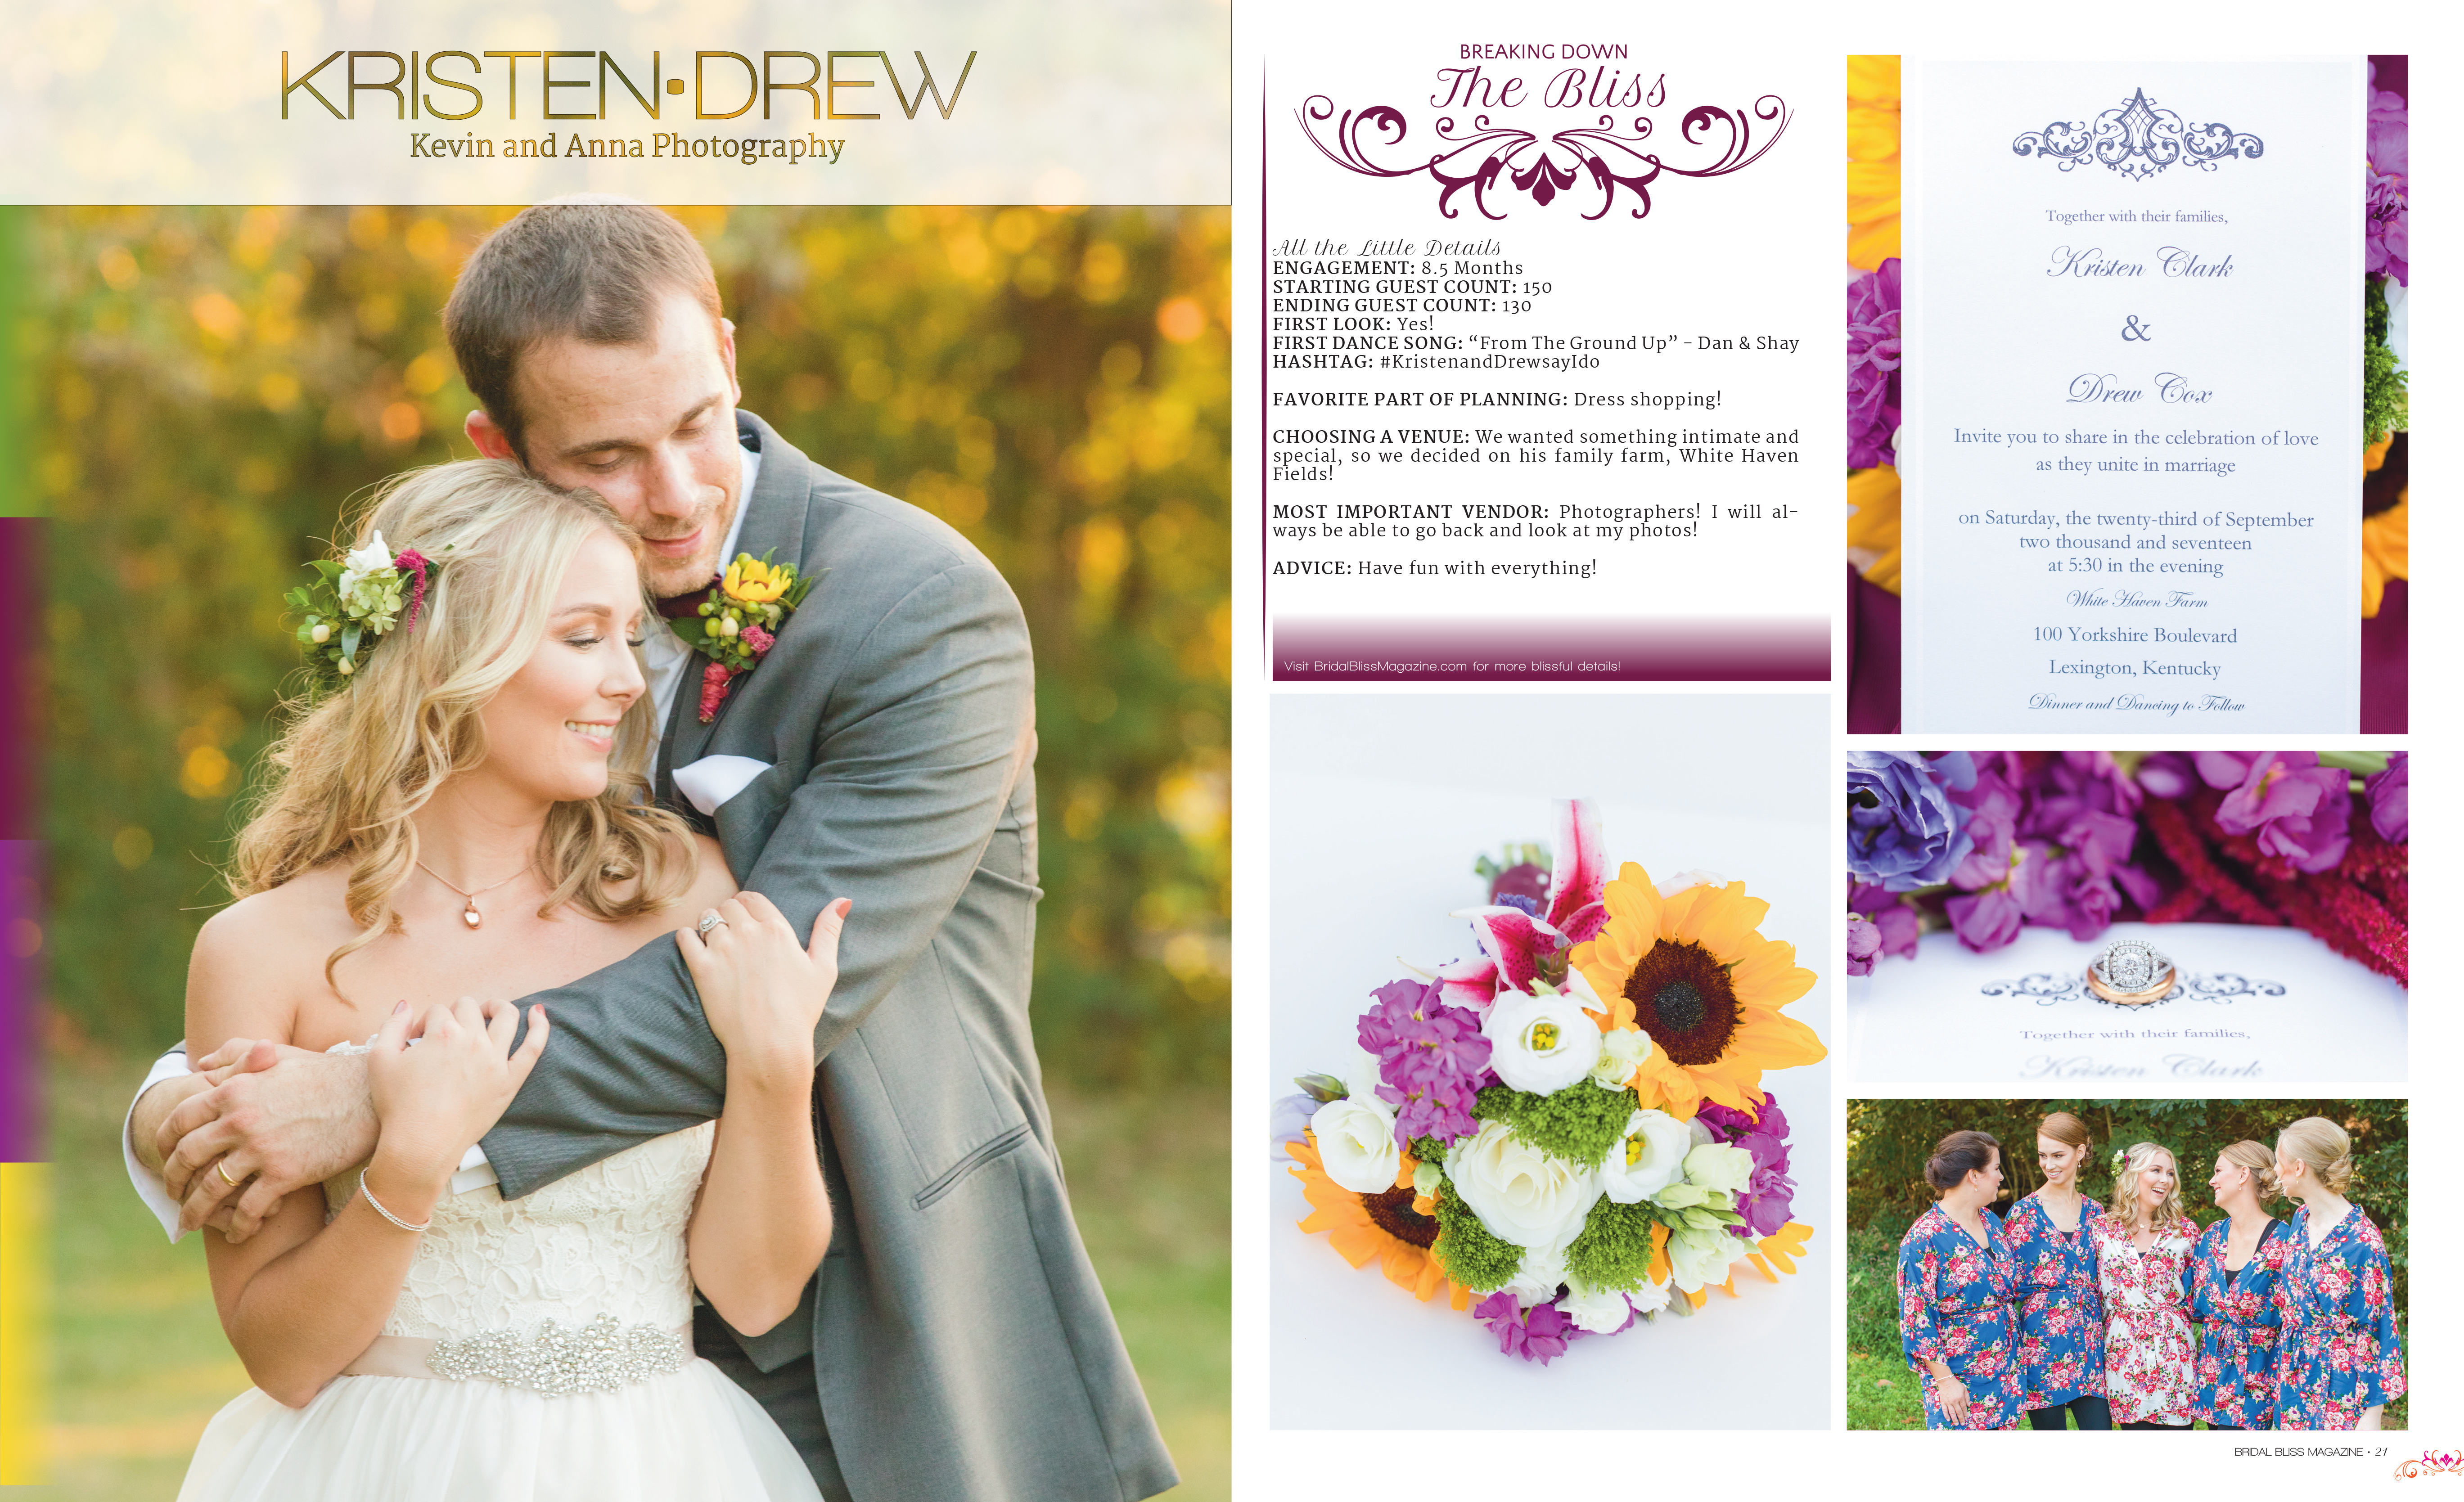 Kristin and Drew's wedding at White Haven Fields featured in volume 4 of Bridal Bliss Magazine